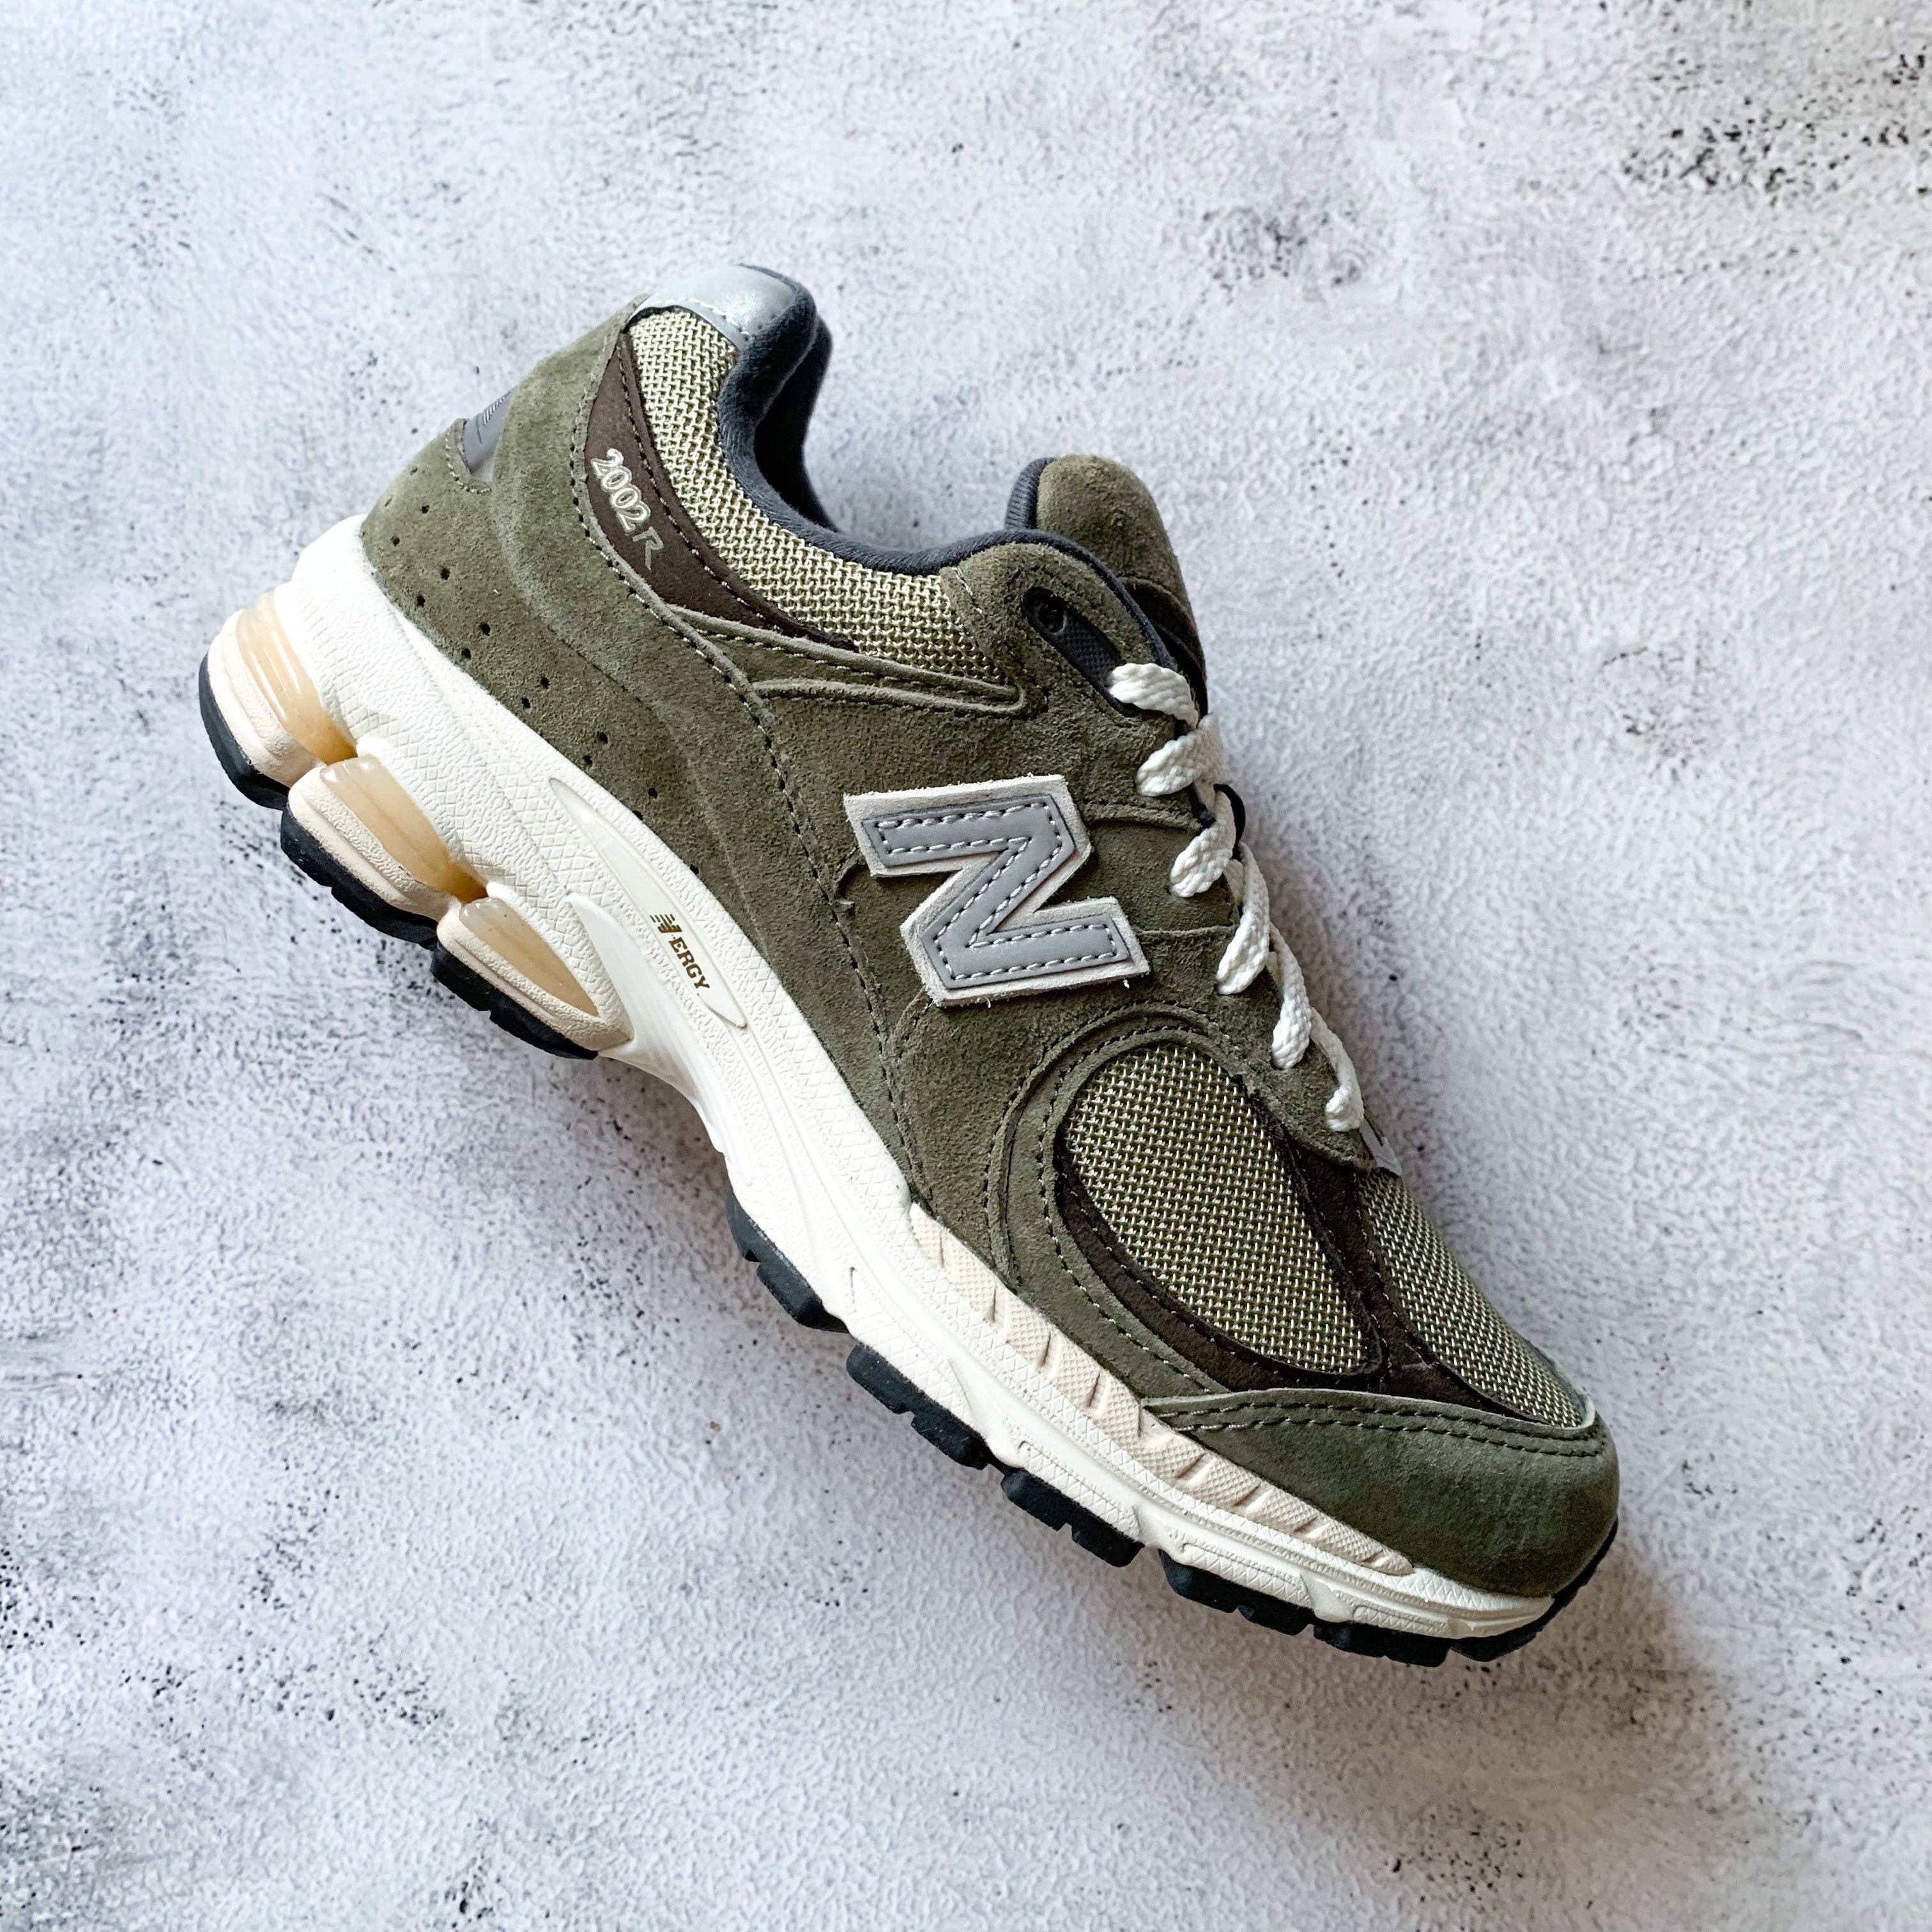 At understrege specificere Smag New Balance 2002R “Dark Camo” – Timmermann Sneakers